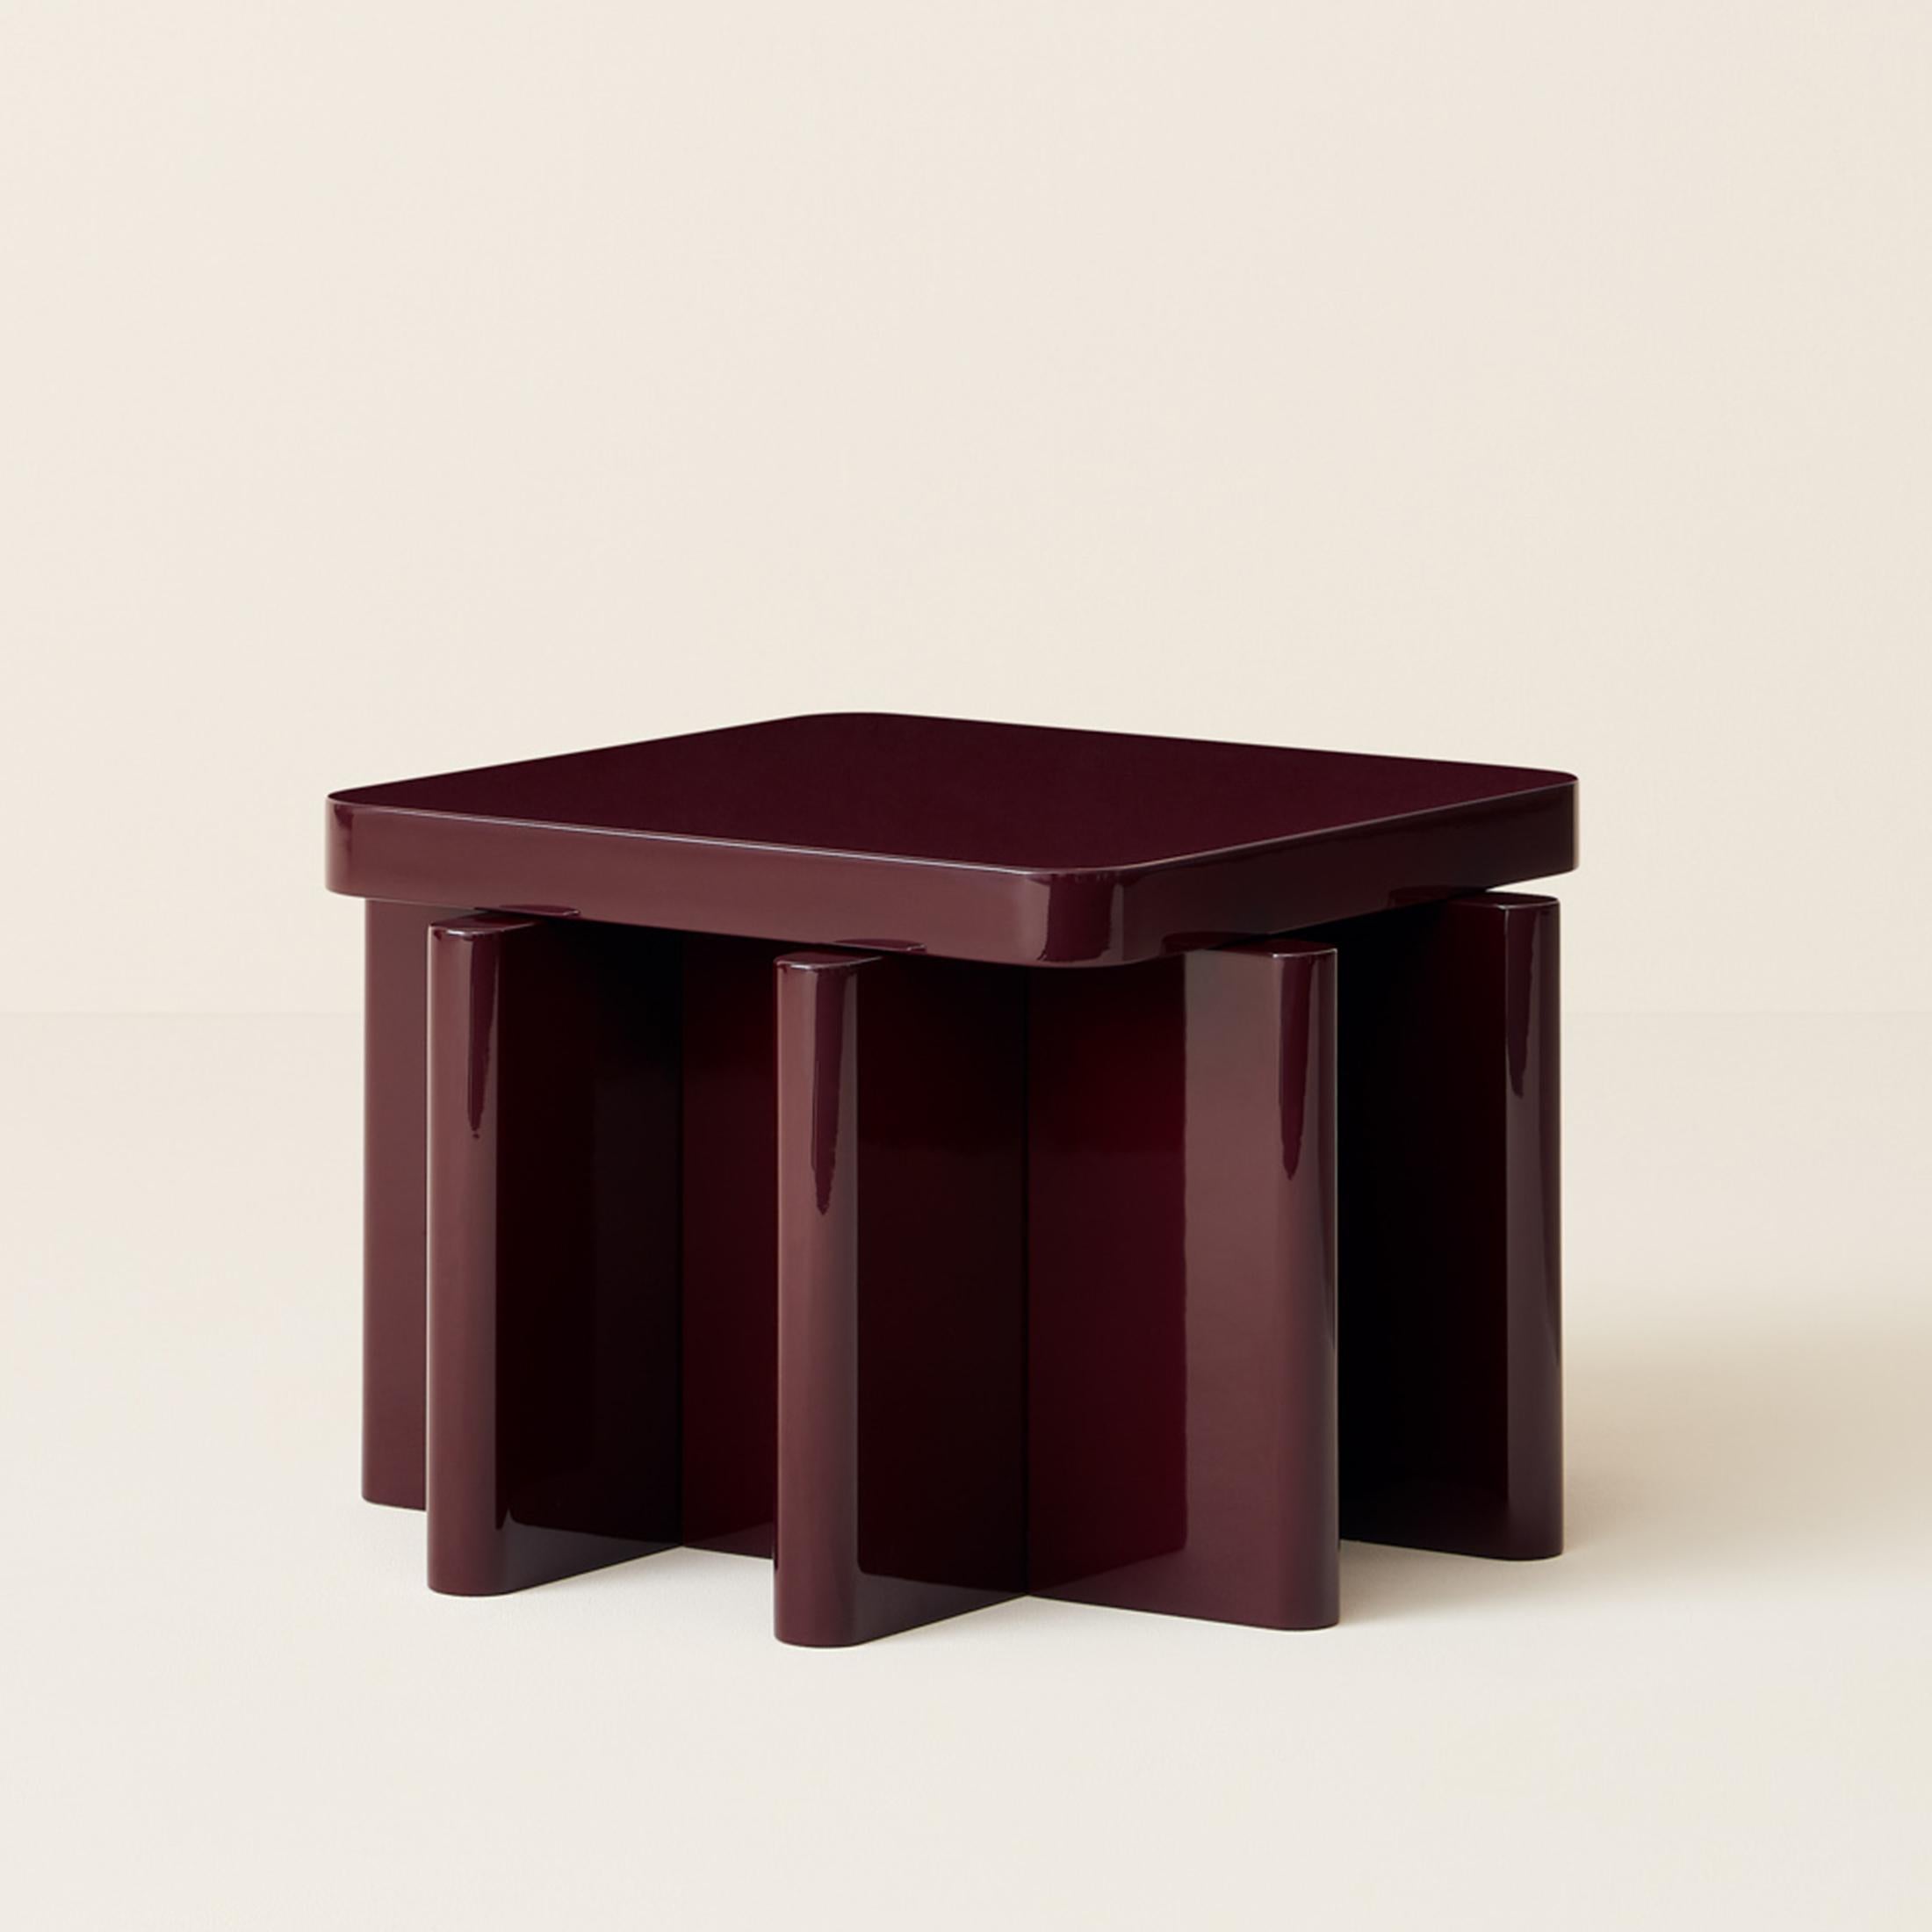 Spina T2.2 Side Table by Cara Davide
Dimensions: 65,5 x 65,5 x H 40 cm 
Materials: MDF lacquered gloss or solid European Walnut. 
Also available in: Dusty Red, Bordeaux, Caramel, Off-white, Noce Europeo.

Spina is a collection of lacquered tables